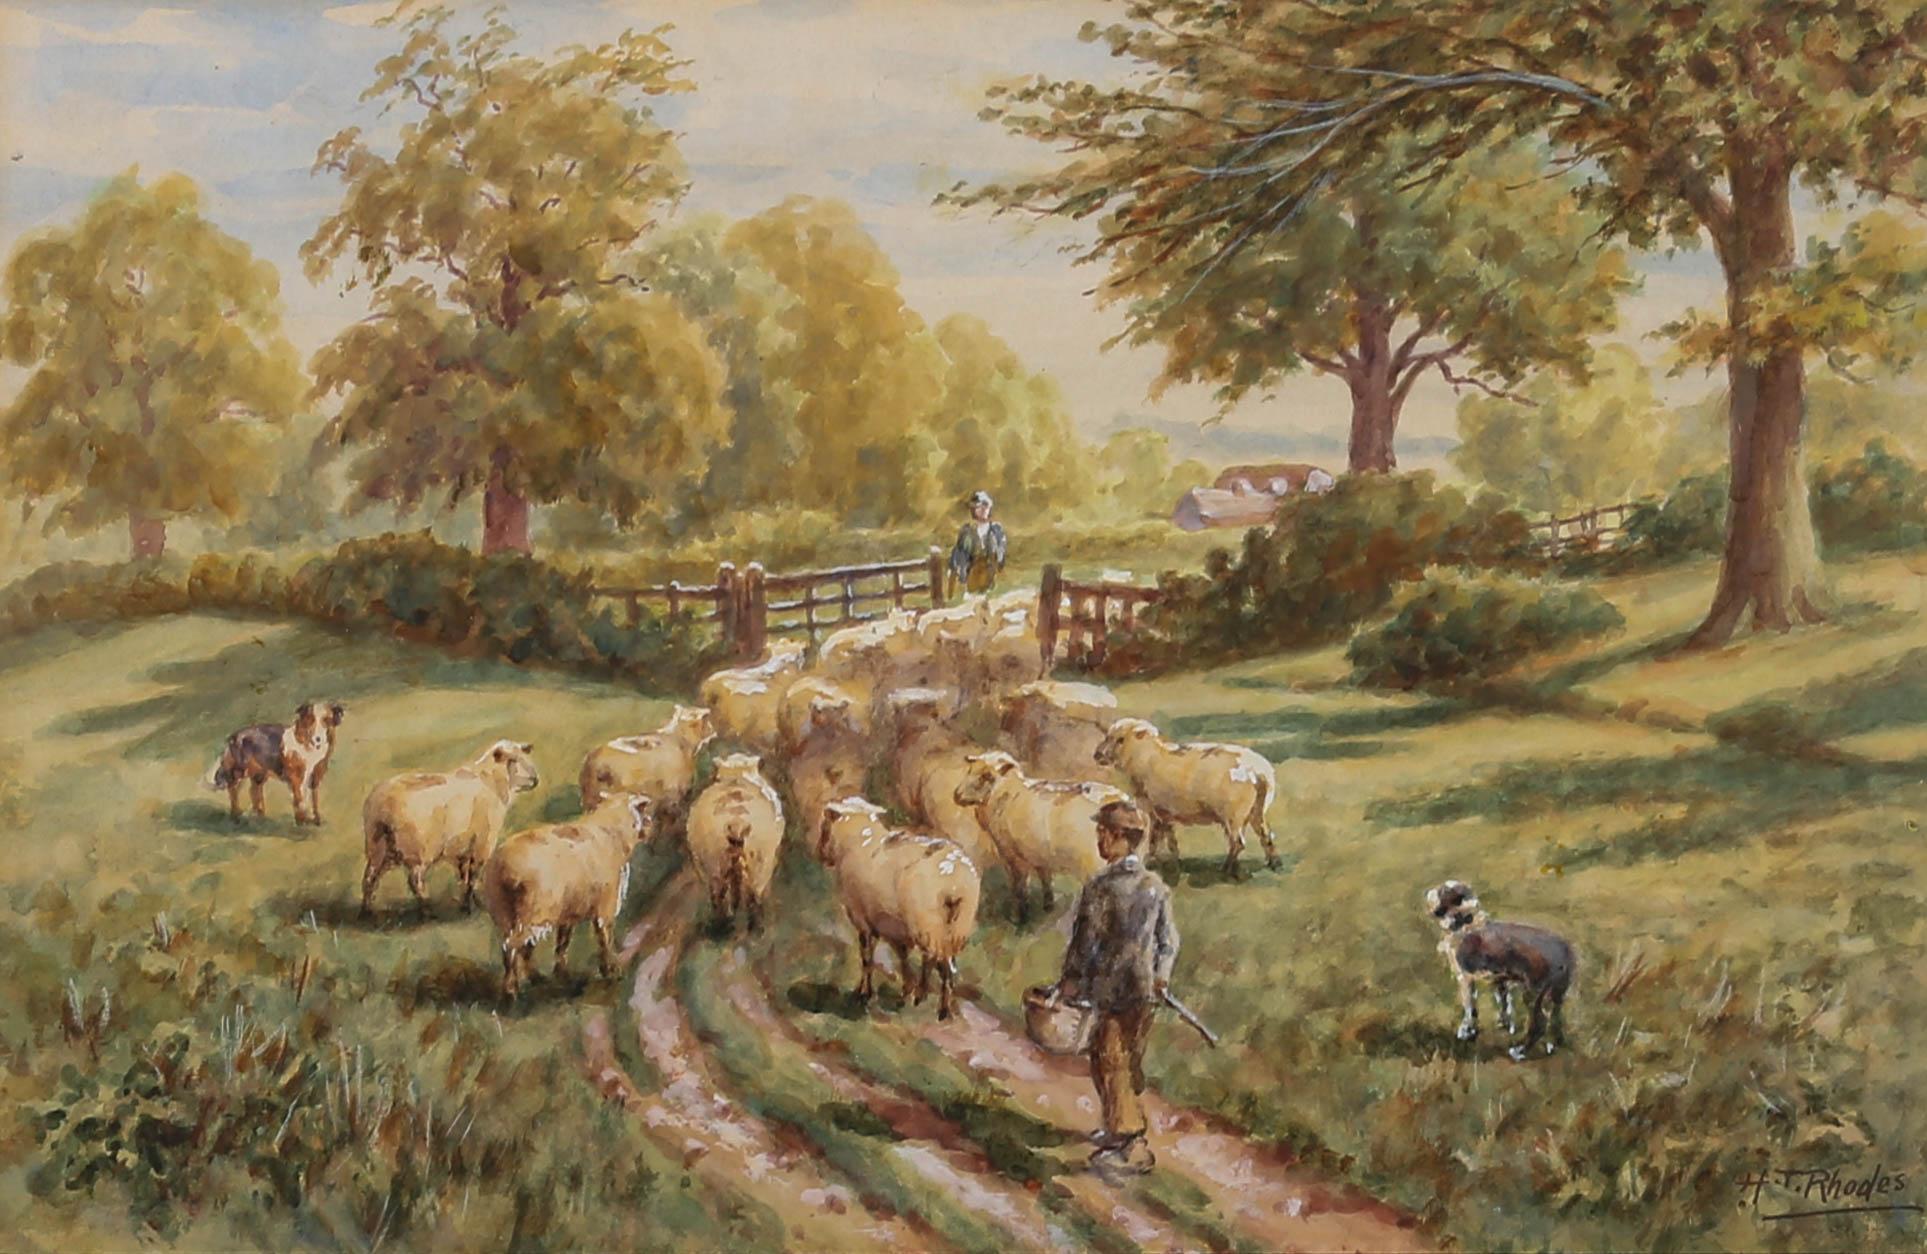 A charming watercolour painting with gouache details, depicting a rural landscape scene with a shepherd and sheep. Signed to the lower right-hand corner. Well-presented in a washline card mount and in a distressed, gilt-effect frame. On watercolour